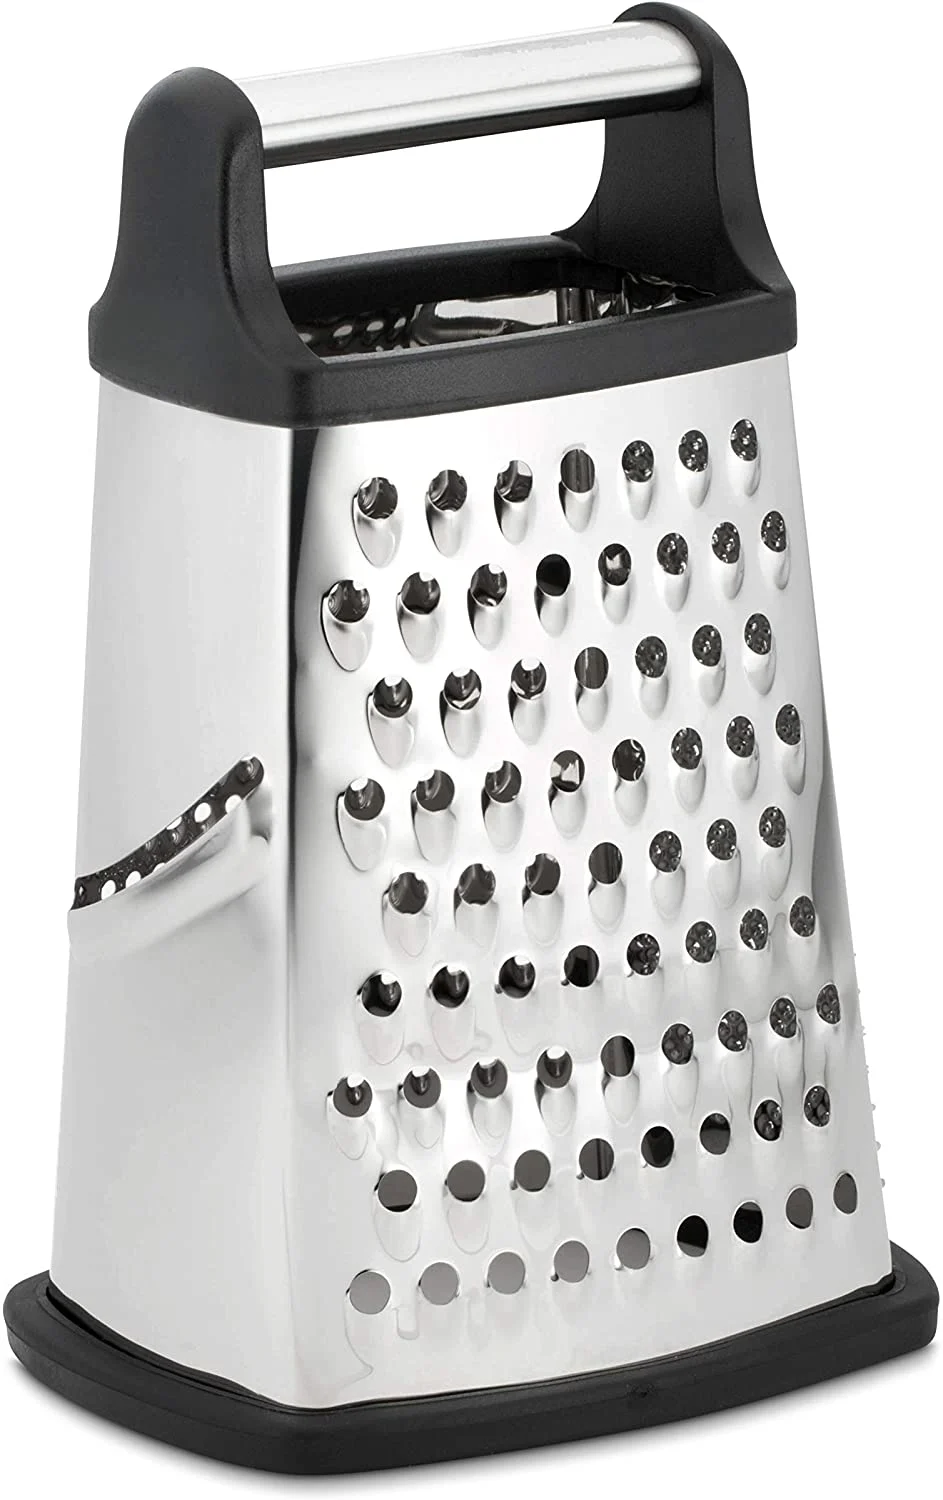 Stainless Steel Box Grater
